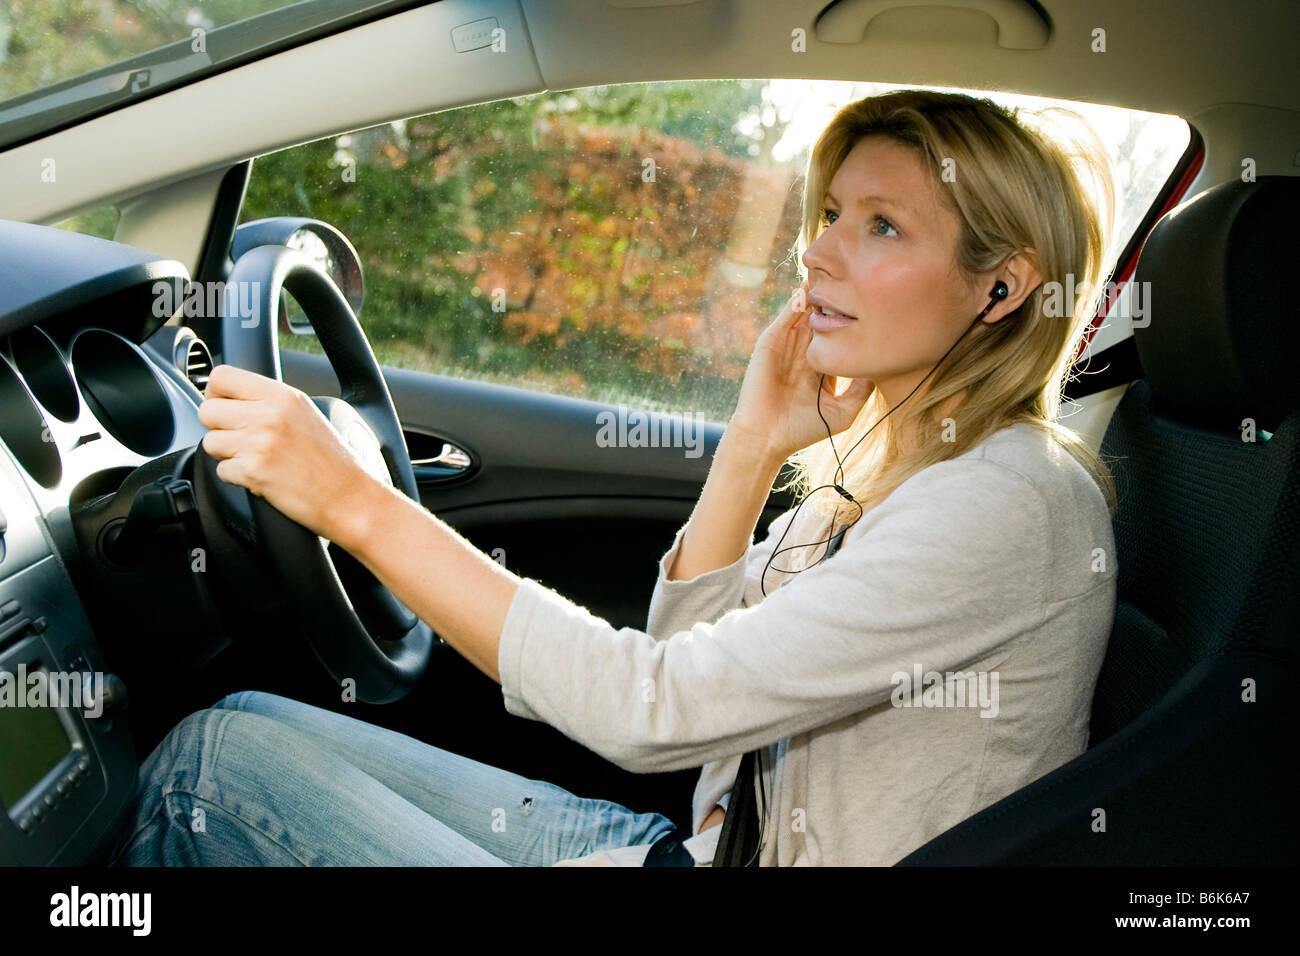 Woman using hands free phone in car Stock Photo